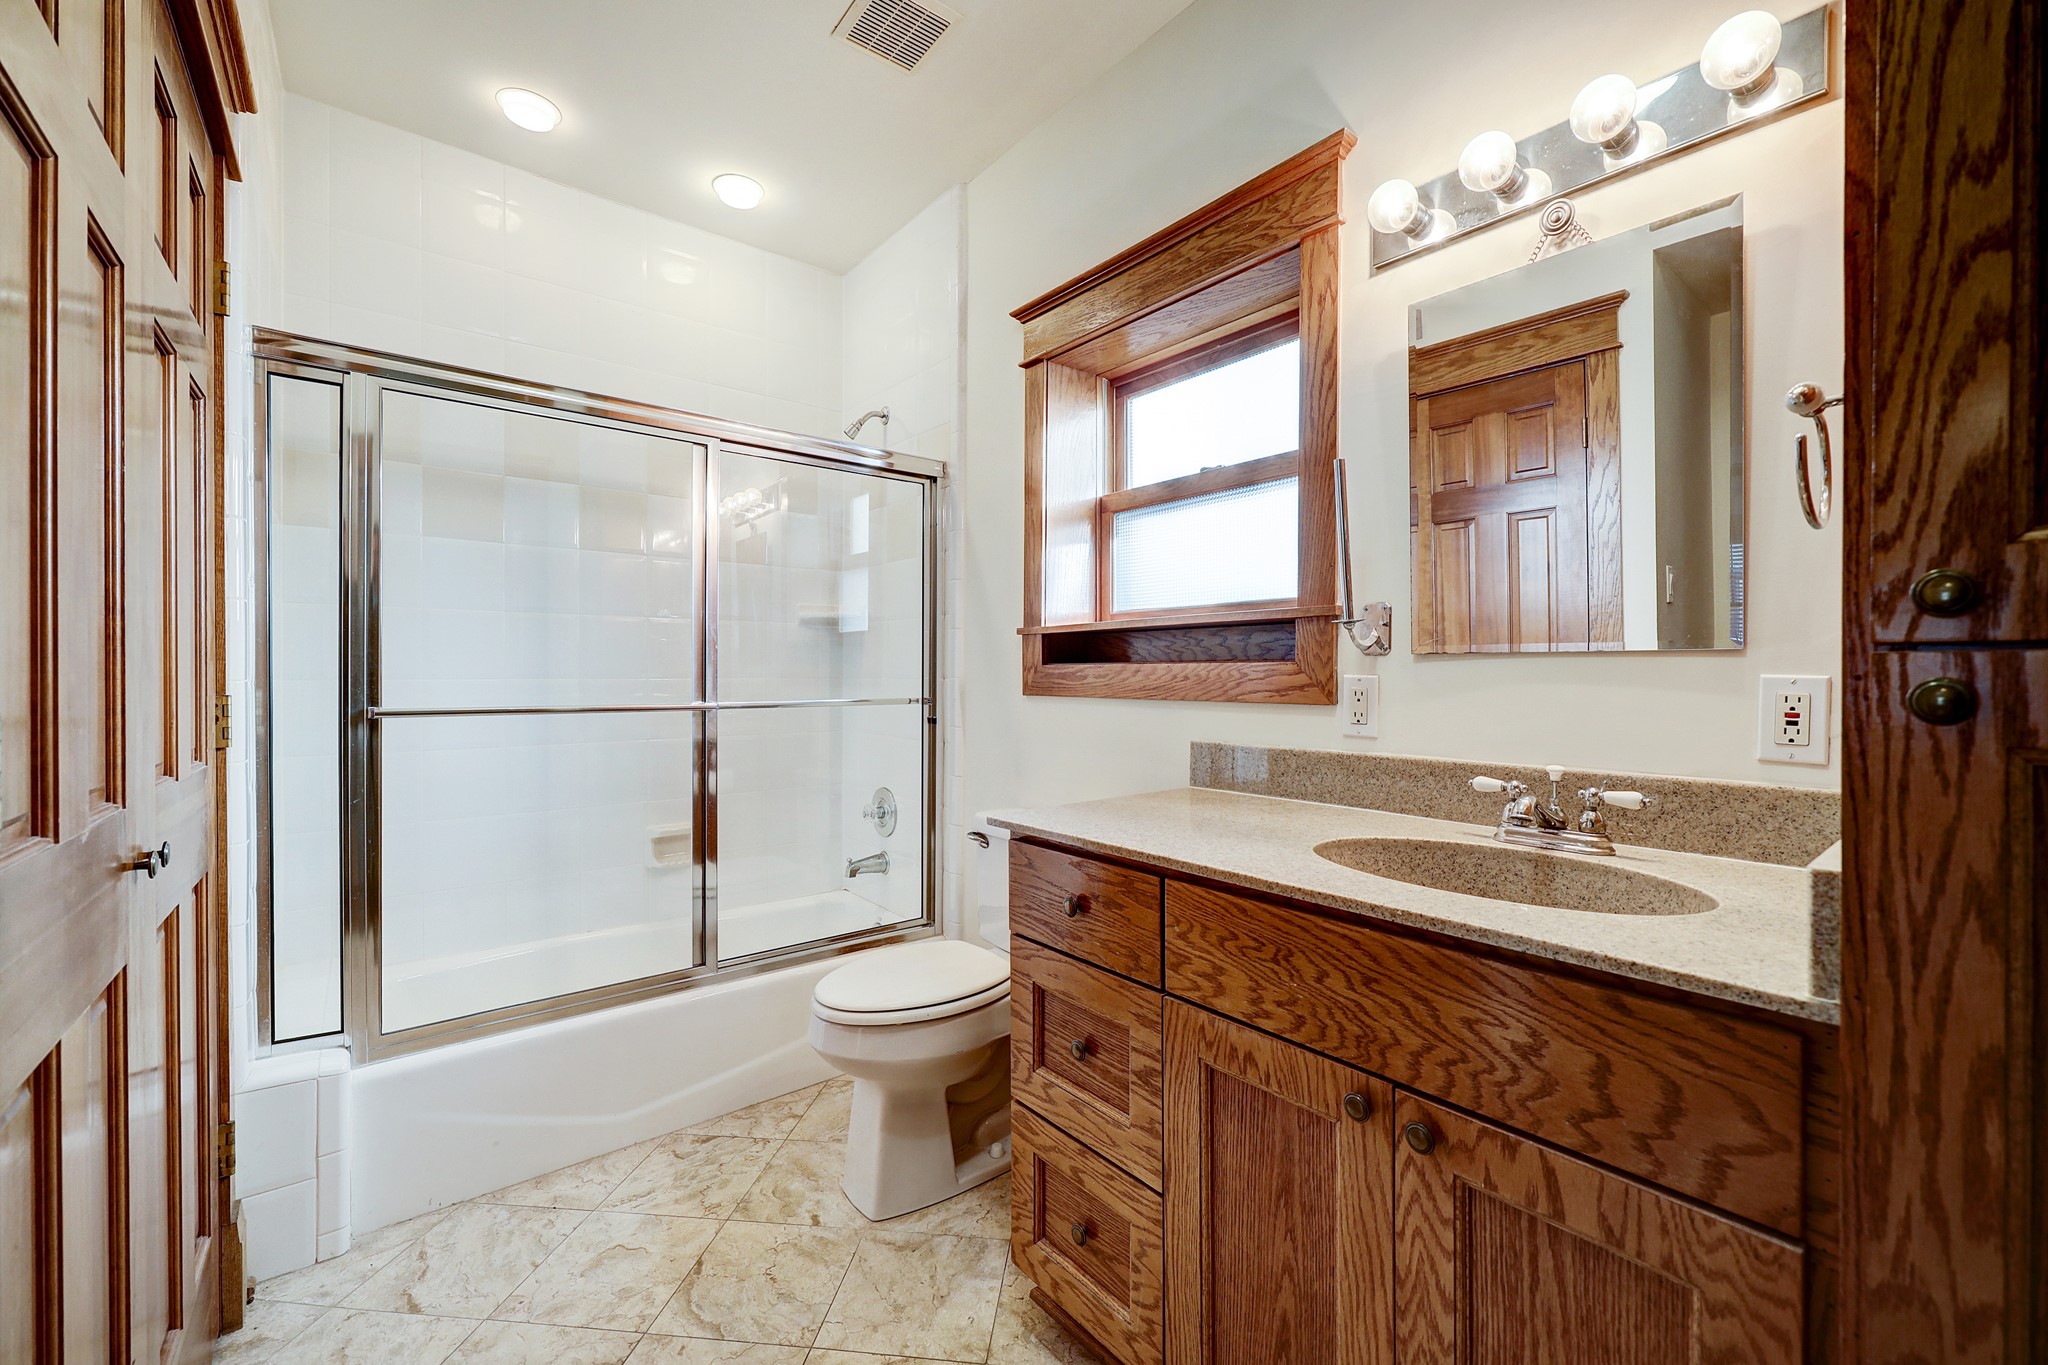 A full bathroom is situated downstairs and is ideally located for guest use yet private from living spaces. Featuring an oversized mirror vanity, granite countertops, and custom cabinetry.